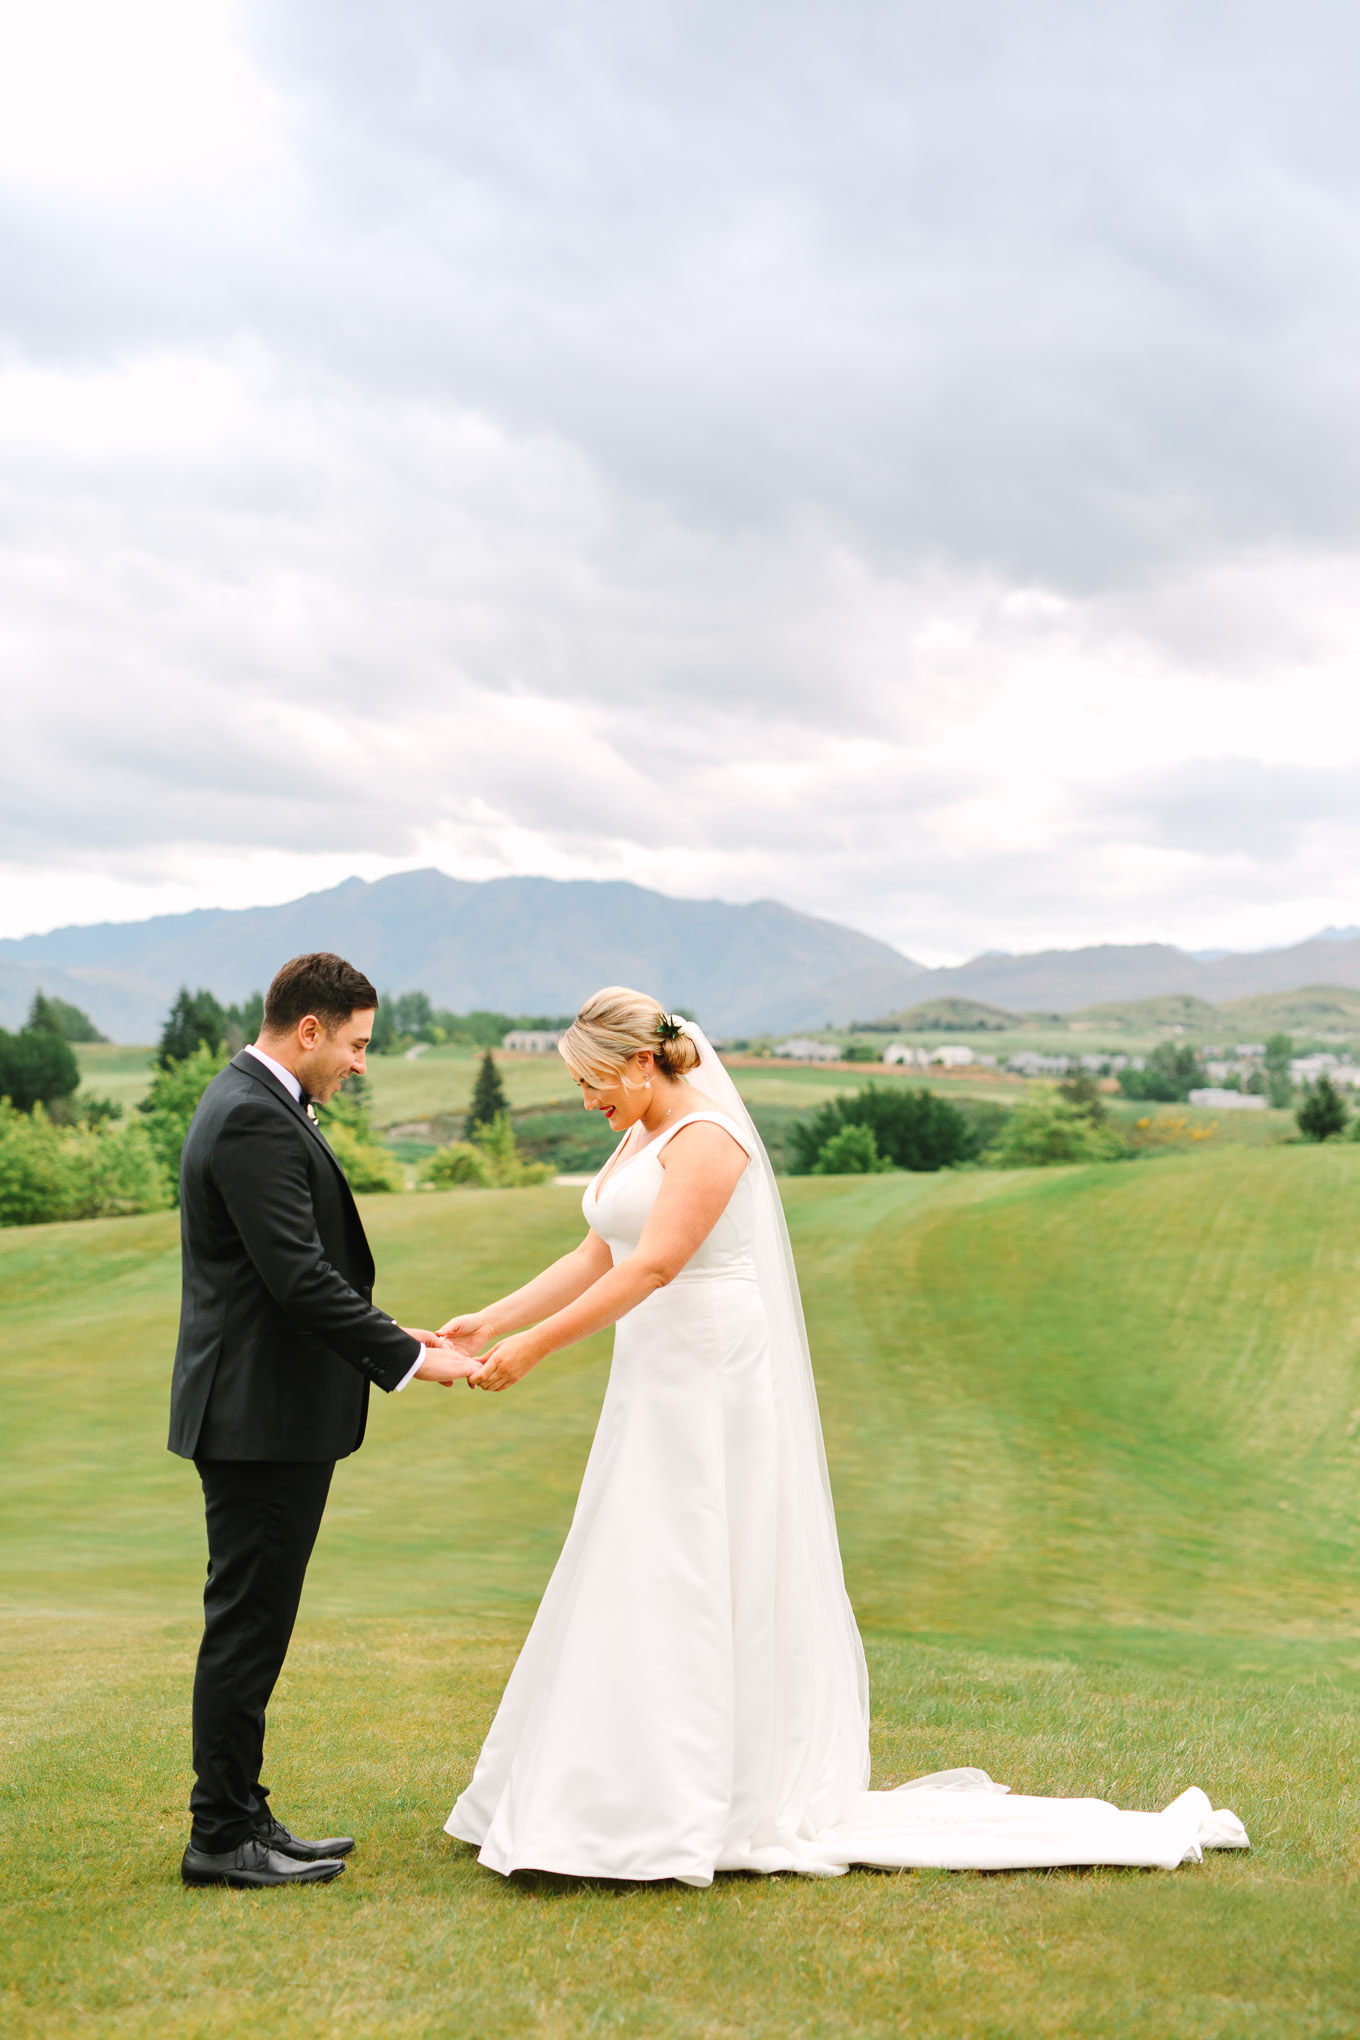 Bride and groom first look on hillside. Millbrook Resort Queenstown New Zealand wedding by Mary Costa Photography | www.marycostaweddings.com